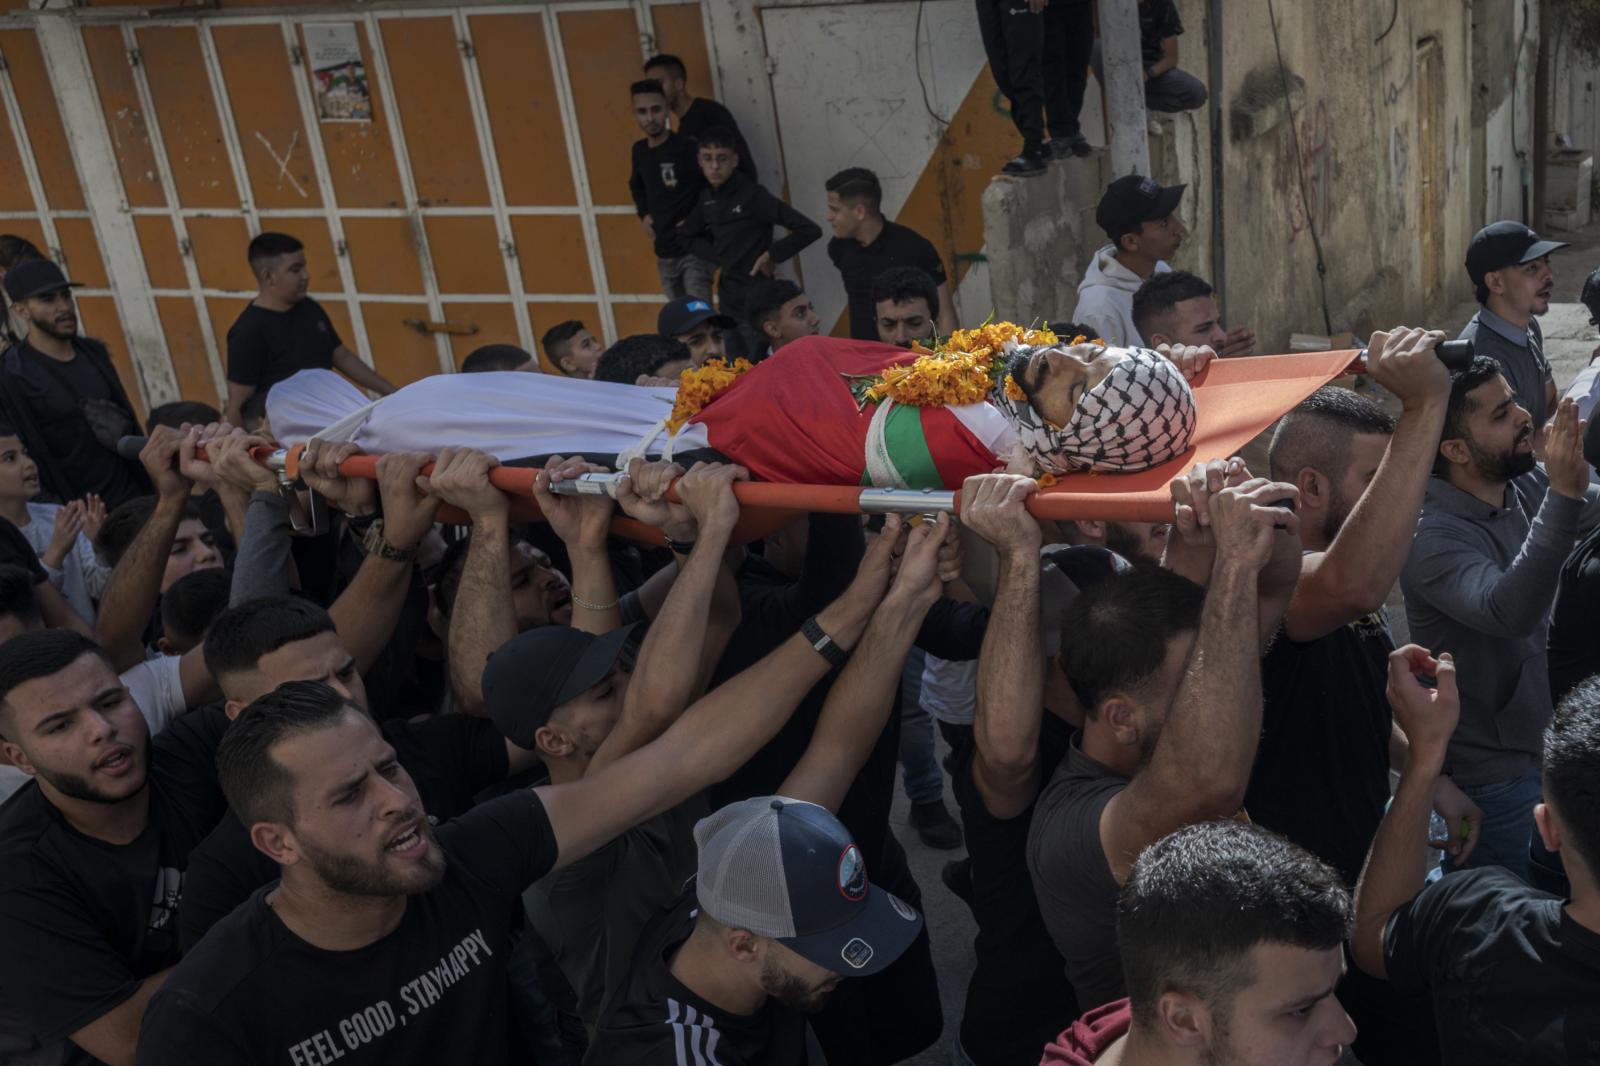 Funeral in West Bank | Buy this image